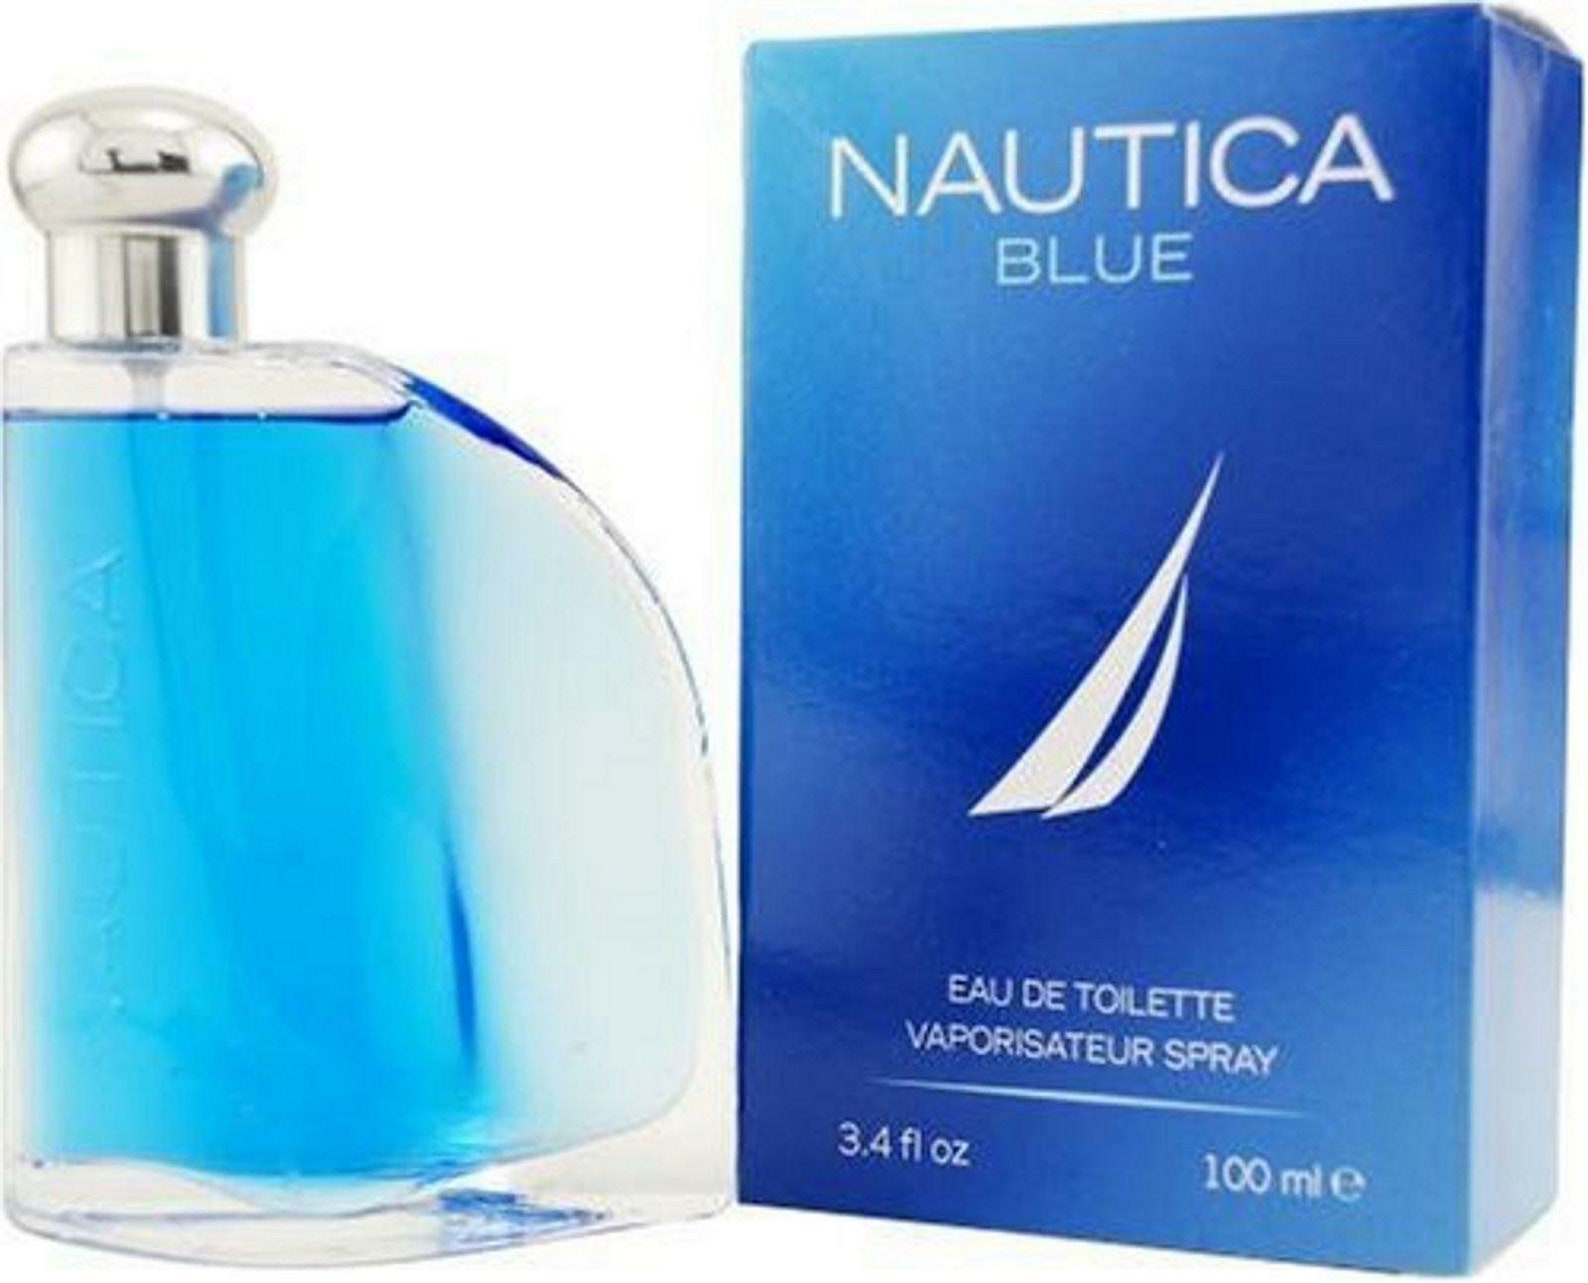 Nautica Blue Hair and Body Wash with Sea Salt - wide 7